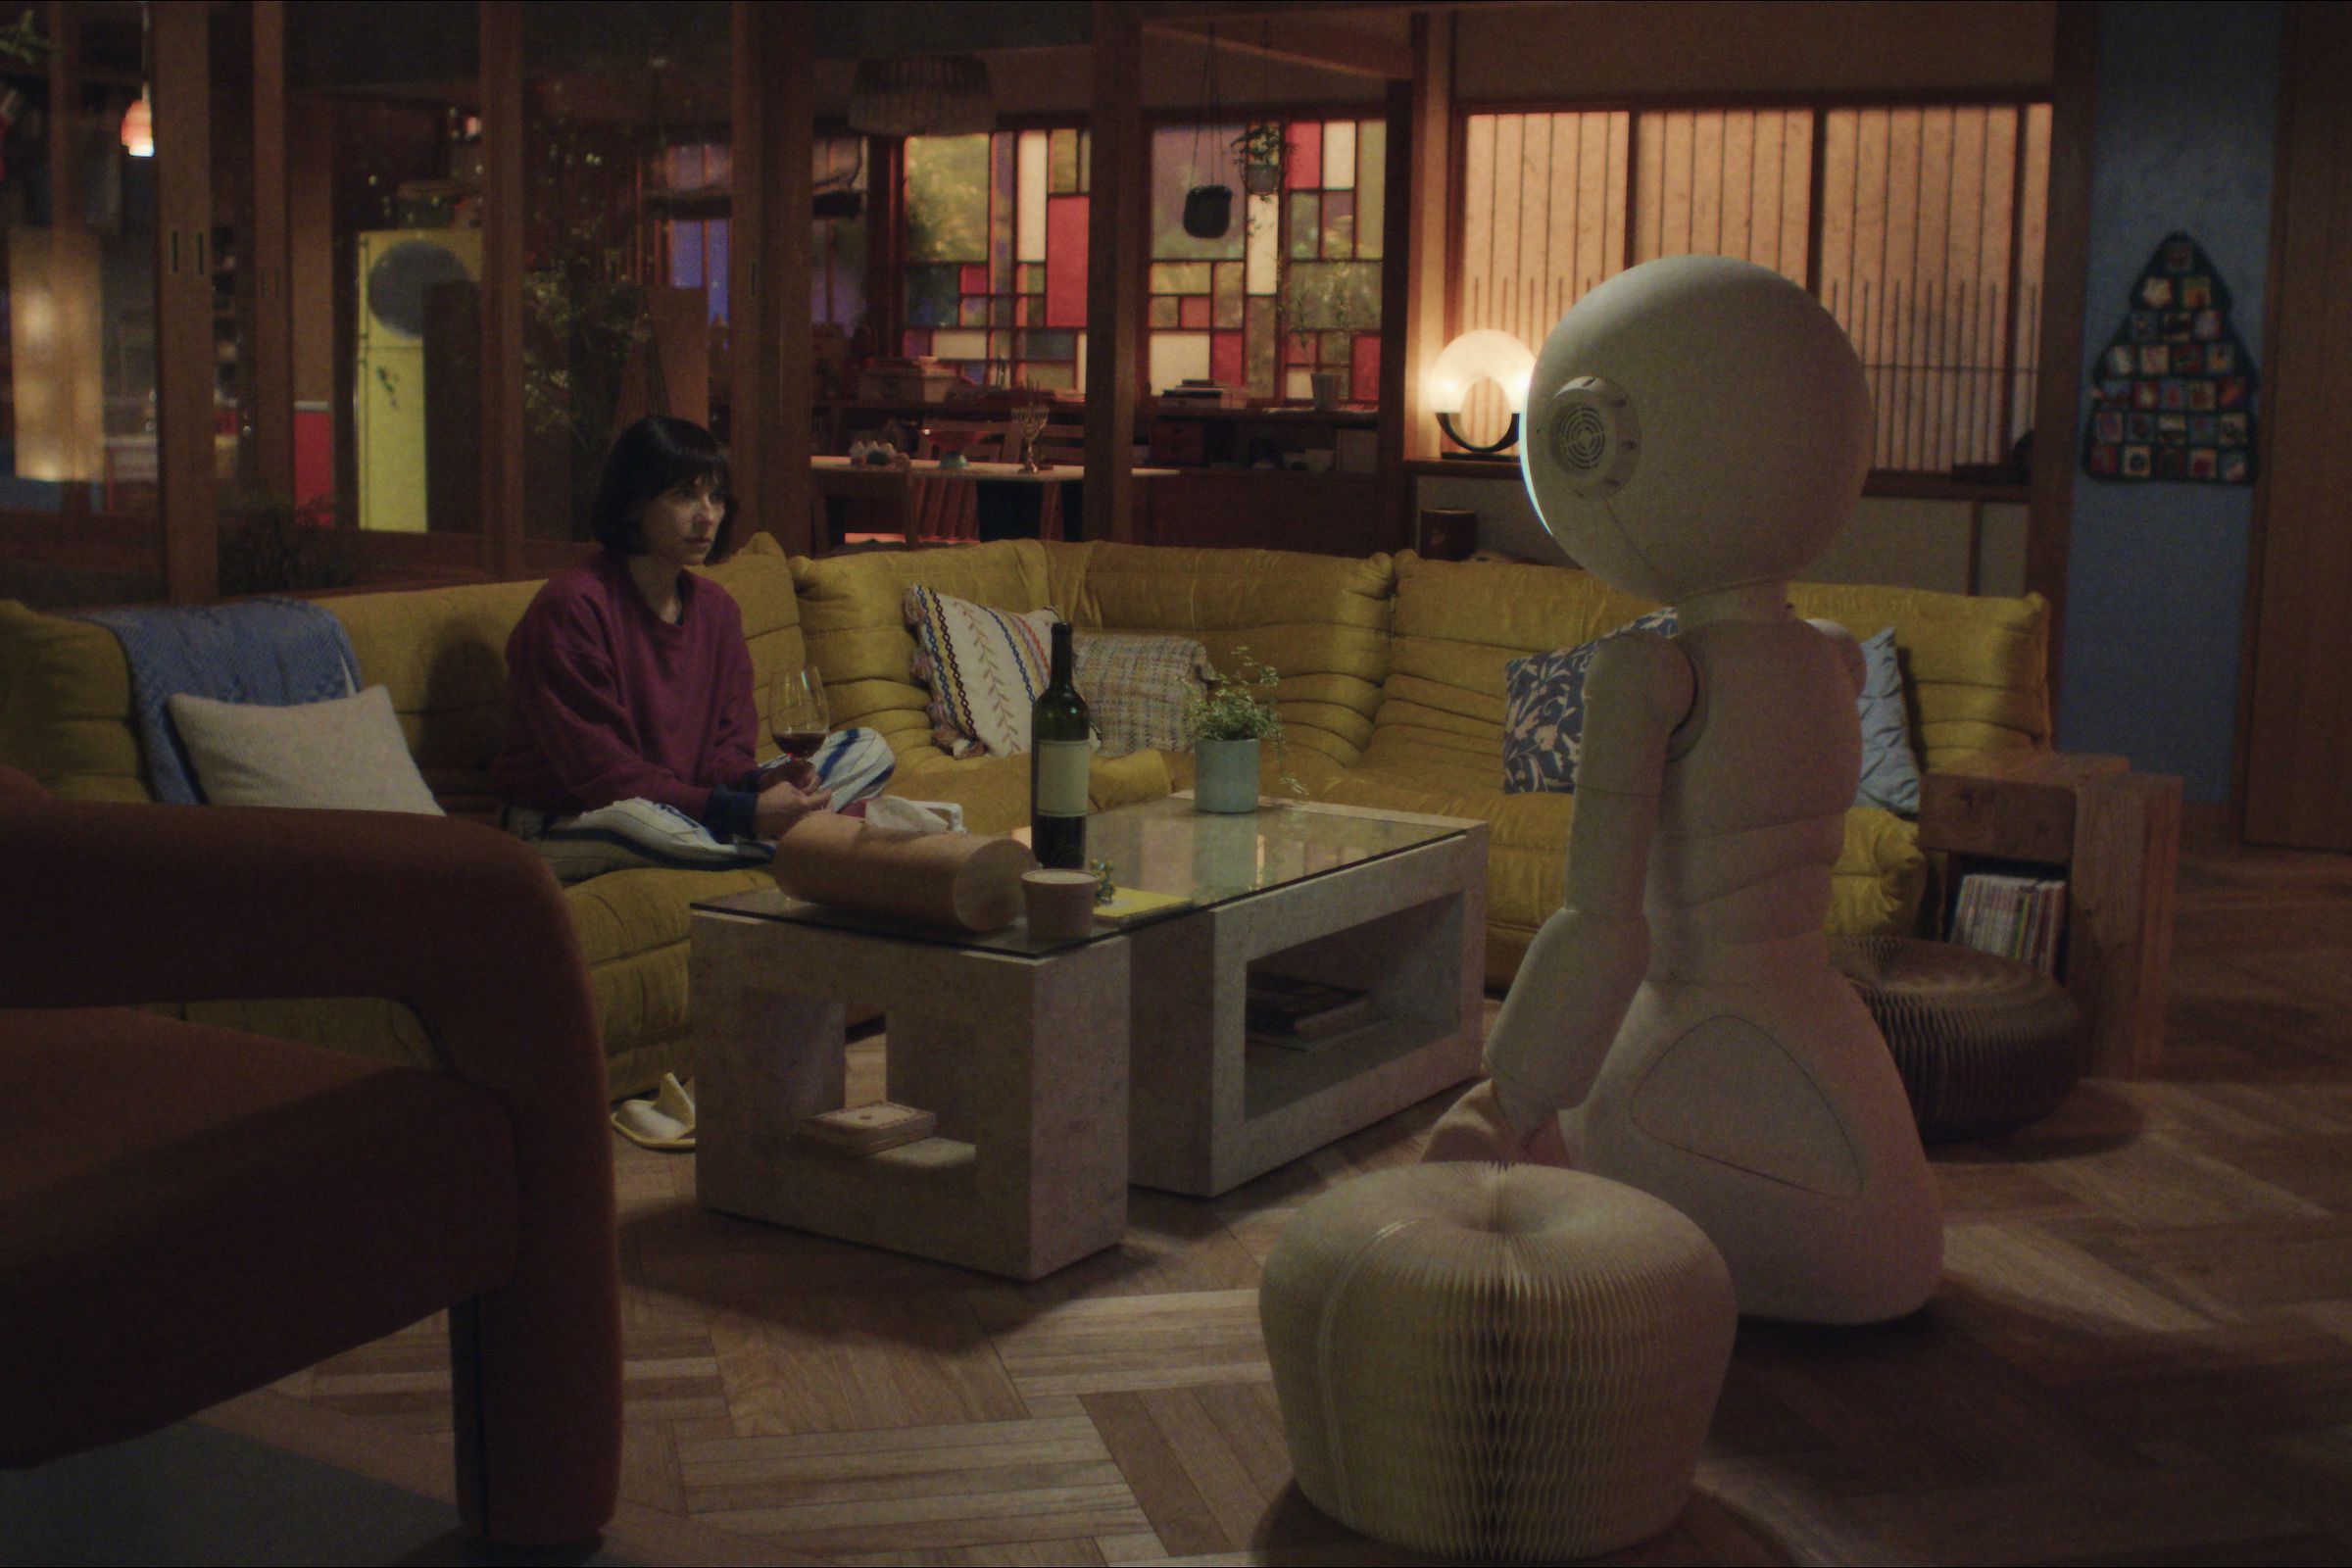 A woman sitting on a couch in a cozy living room across from a humanoid robot.